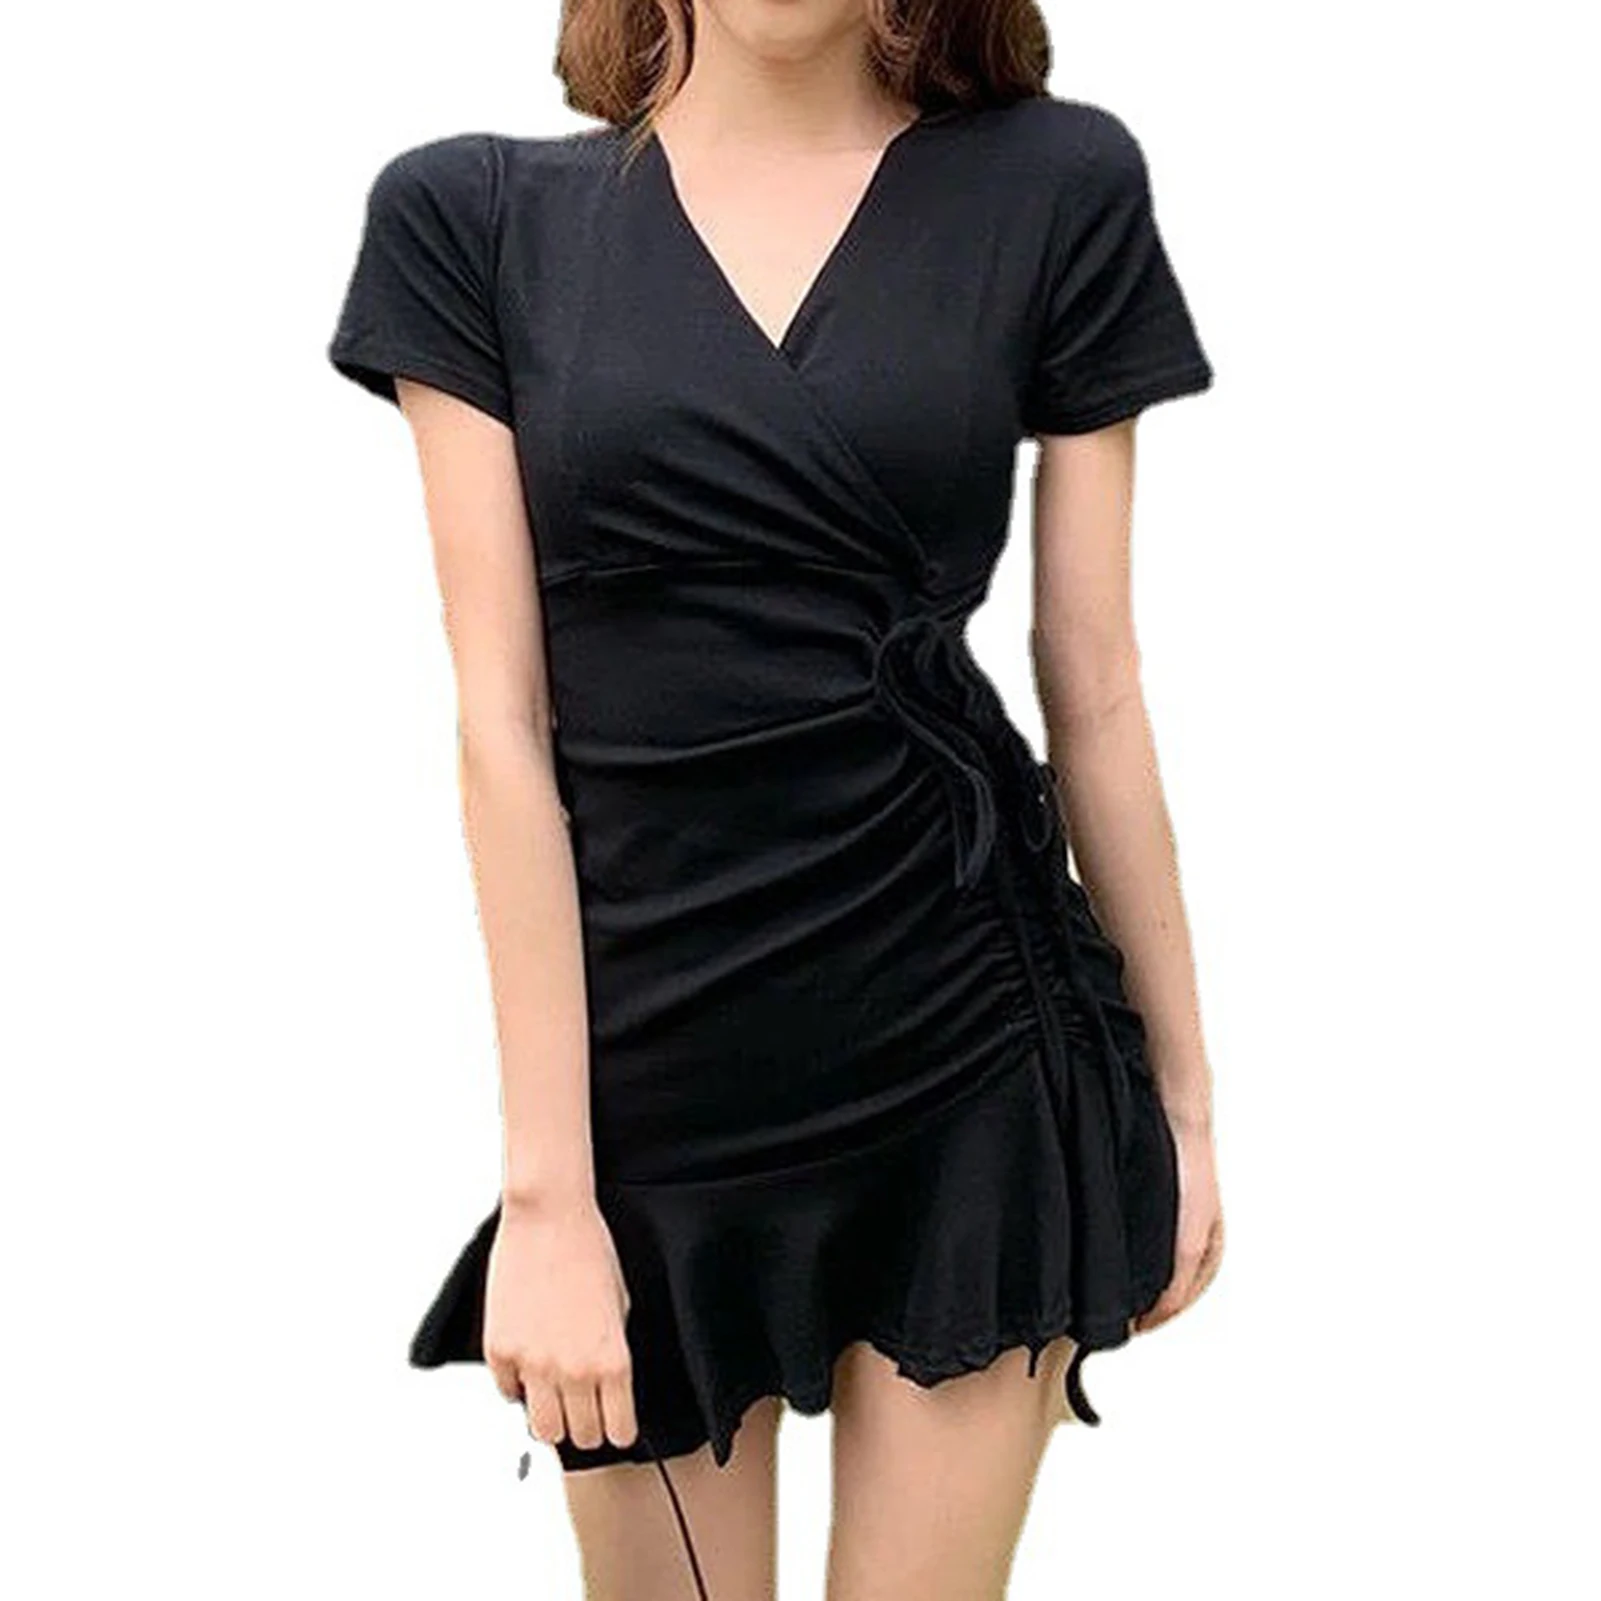 

Women Sexy V Neck Summer Dress Above-knee Pleated Hot Dress Great for Casual Club Party and Vacation